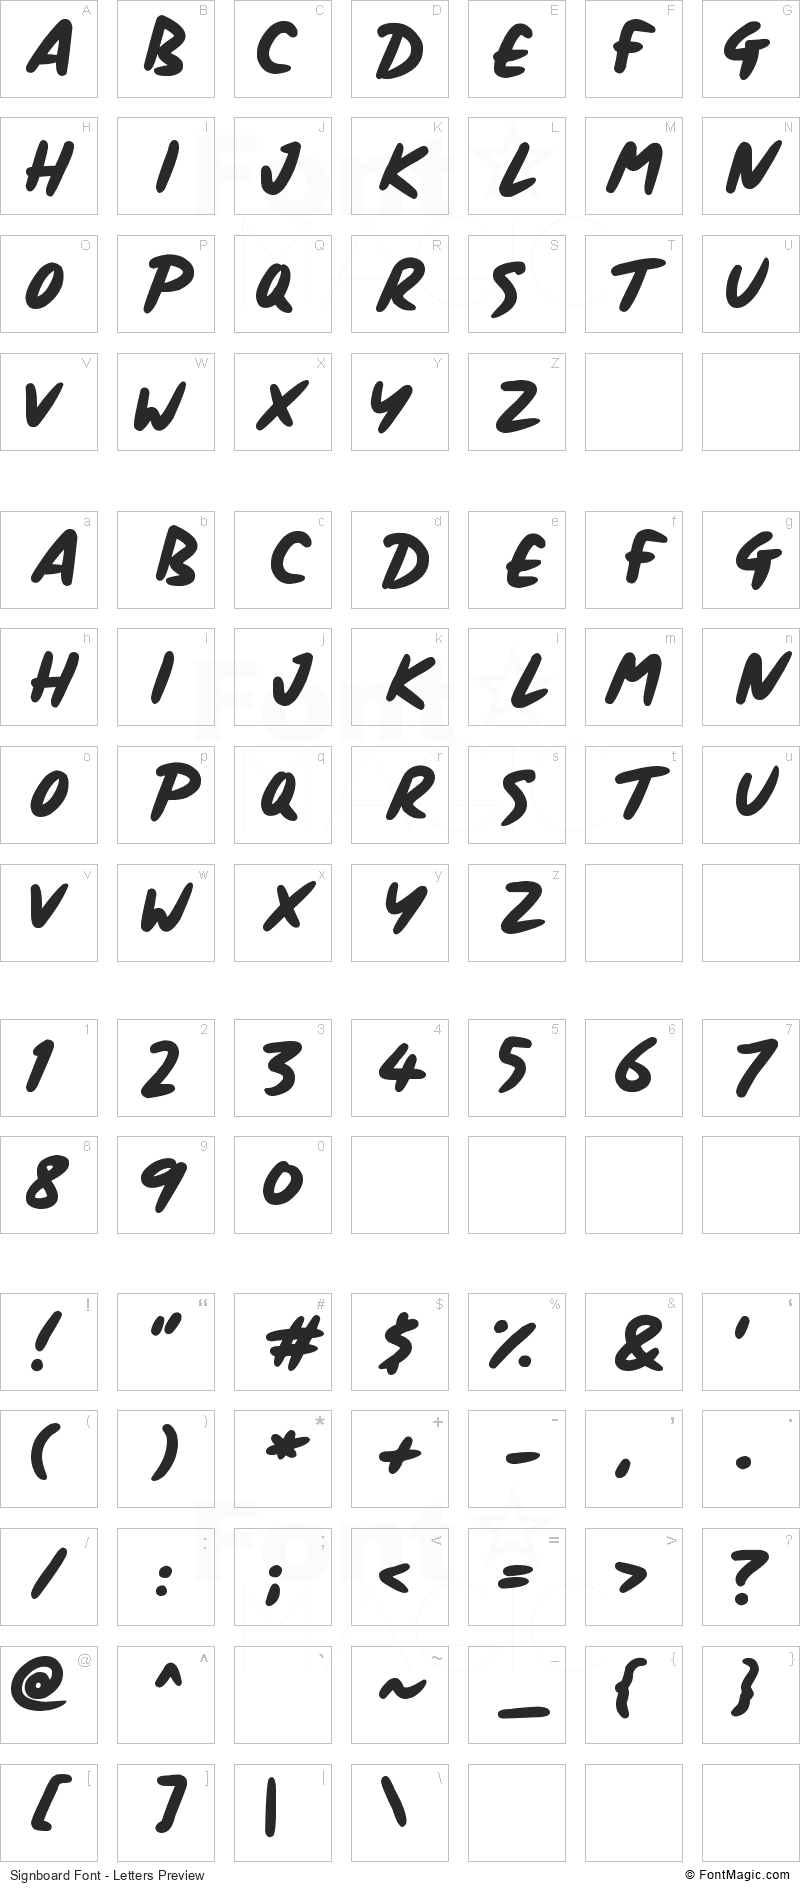 Signboard Font - All Latters Preview Chart